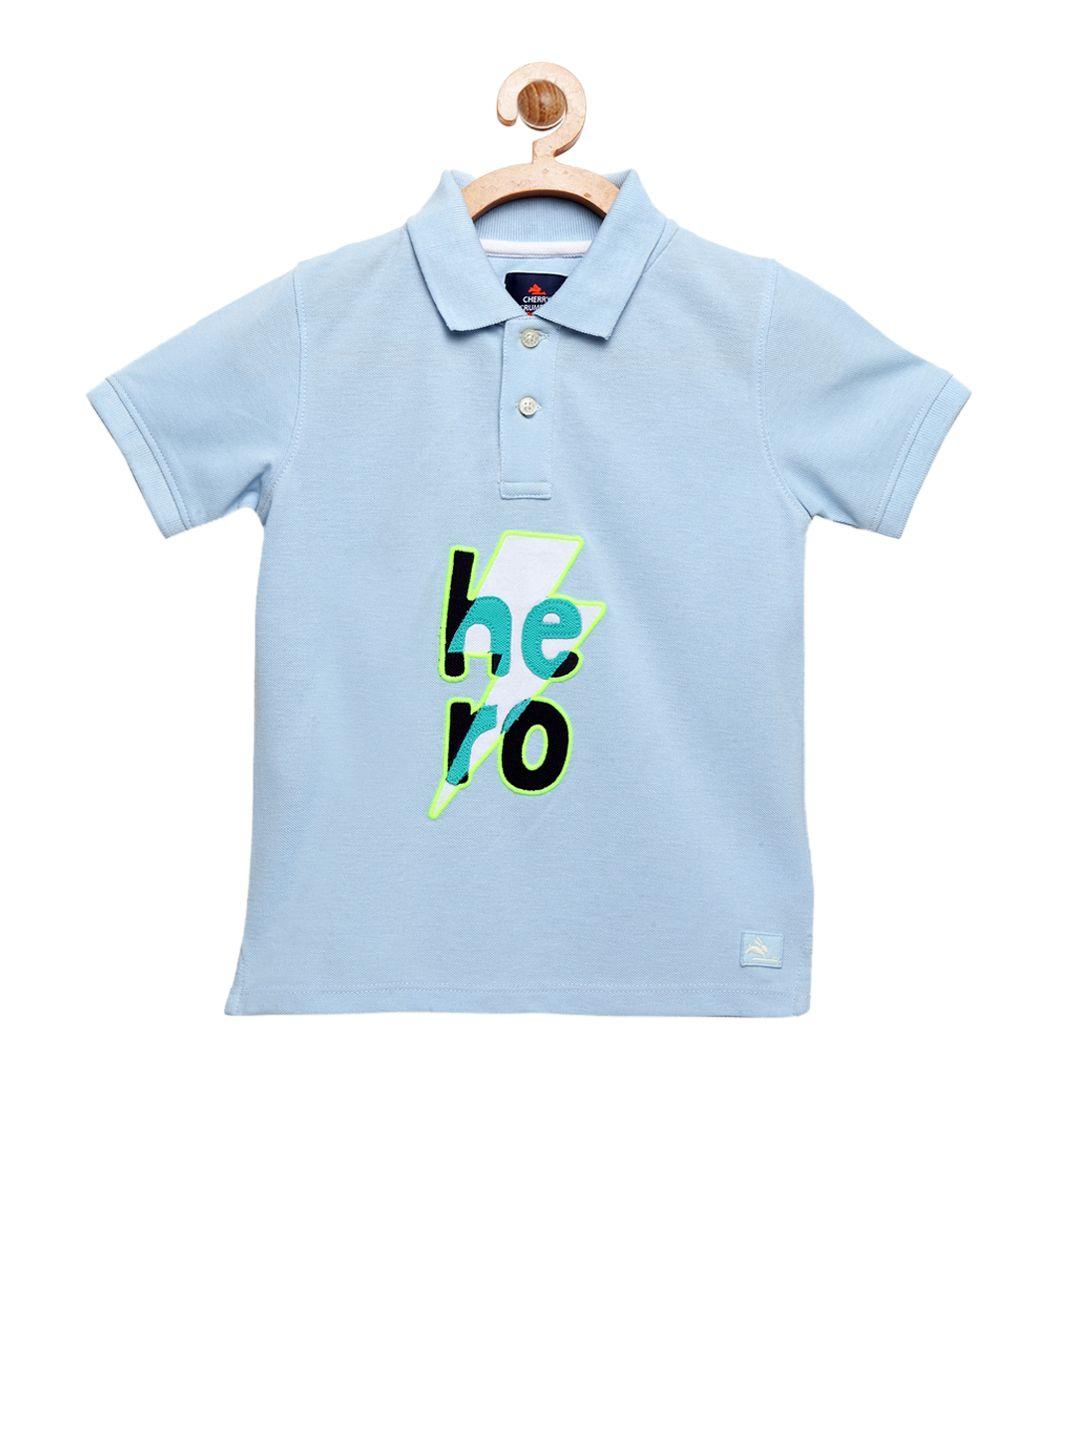 cherry crumble unisex kids turquoise blue polo collar t-shirt with applique detail